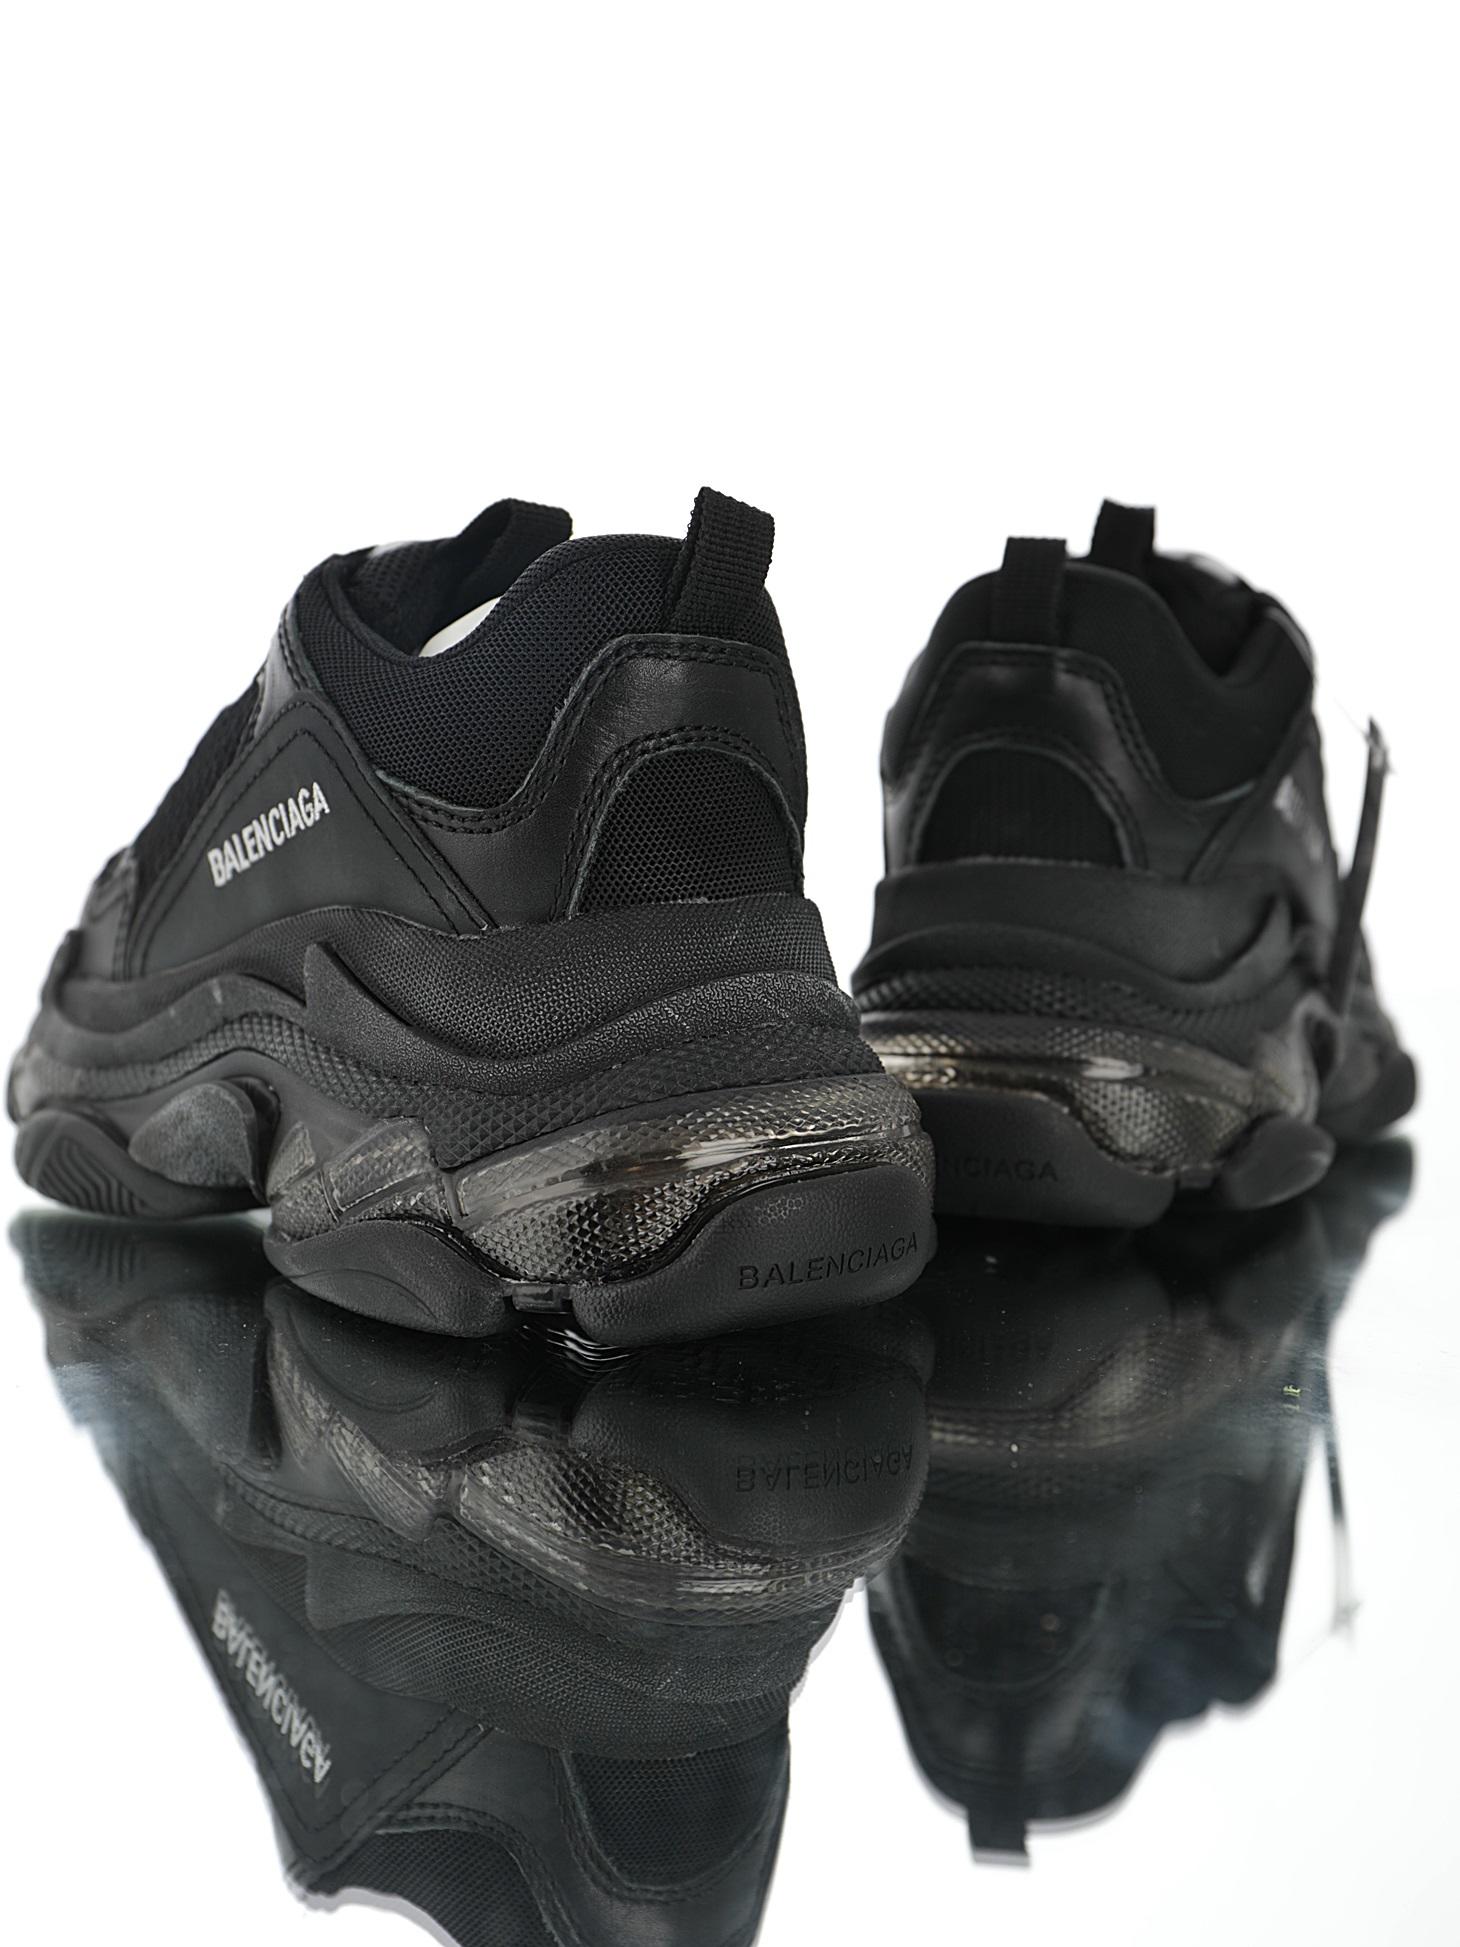 Triple s black clear sole - whatever on 